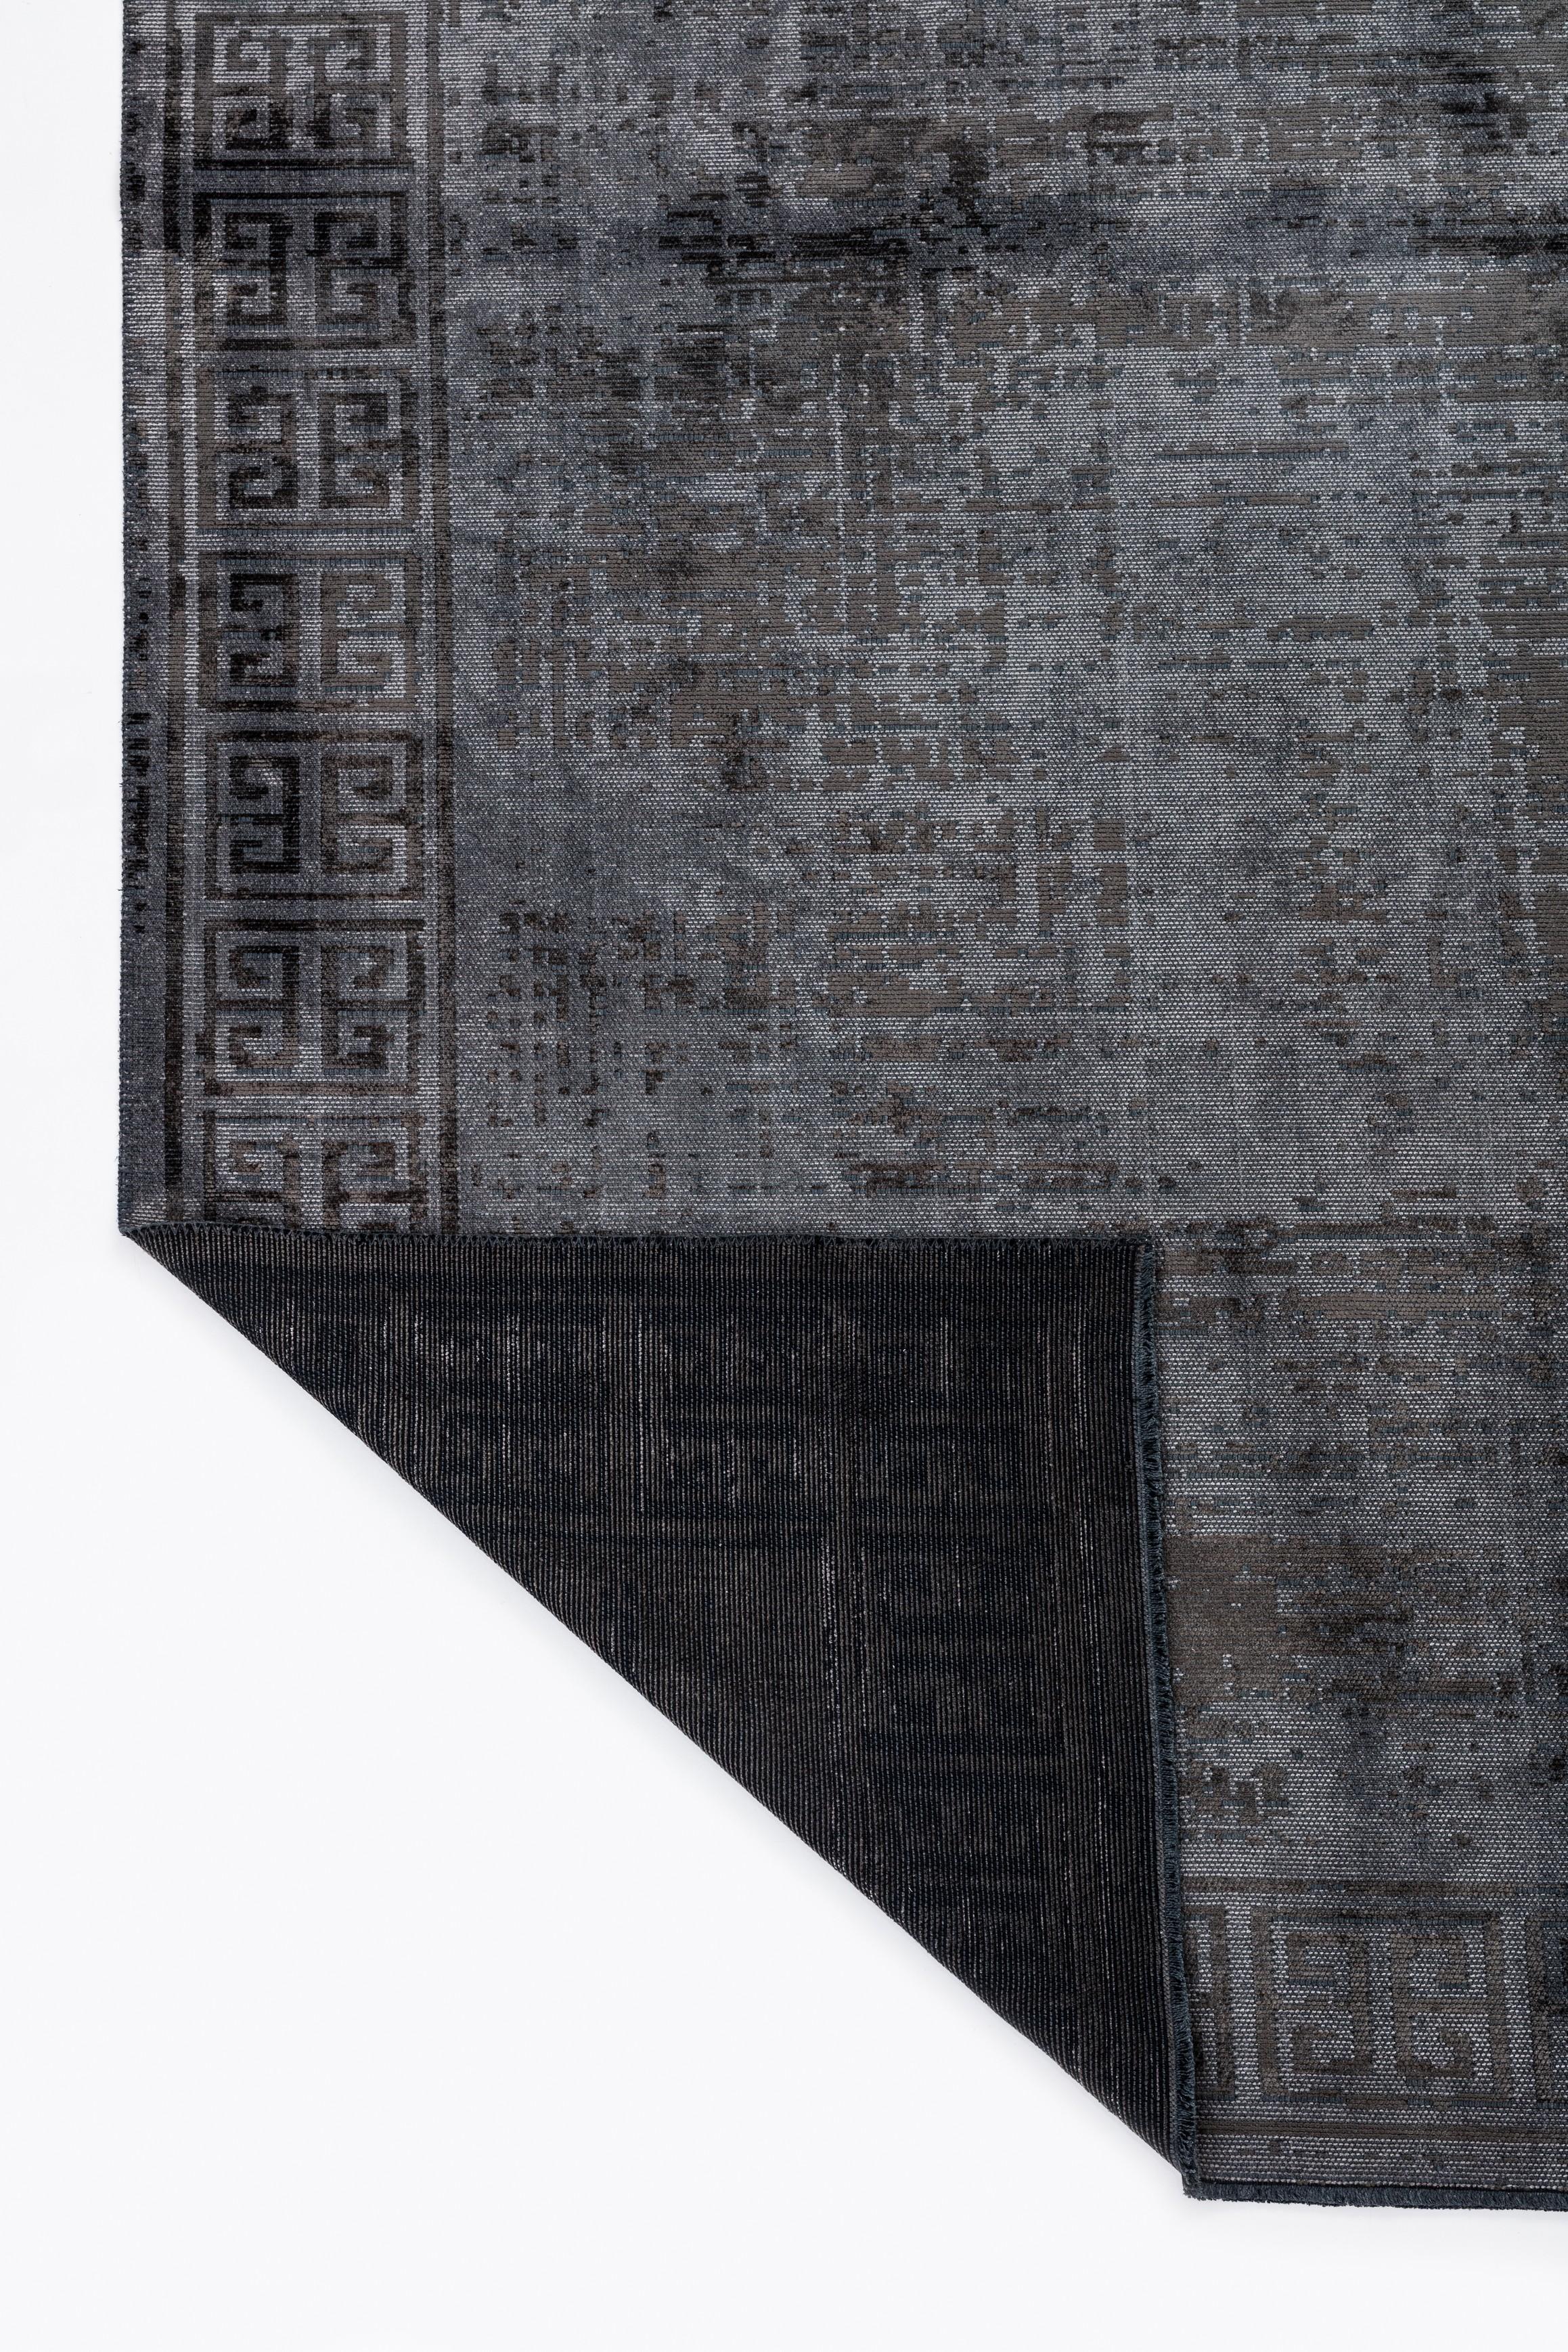 For Sale:  (Gray) Modern Camouflage Luxury Area Rug 3